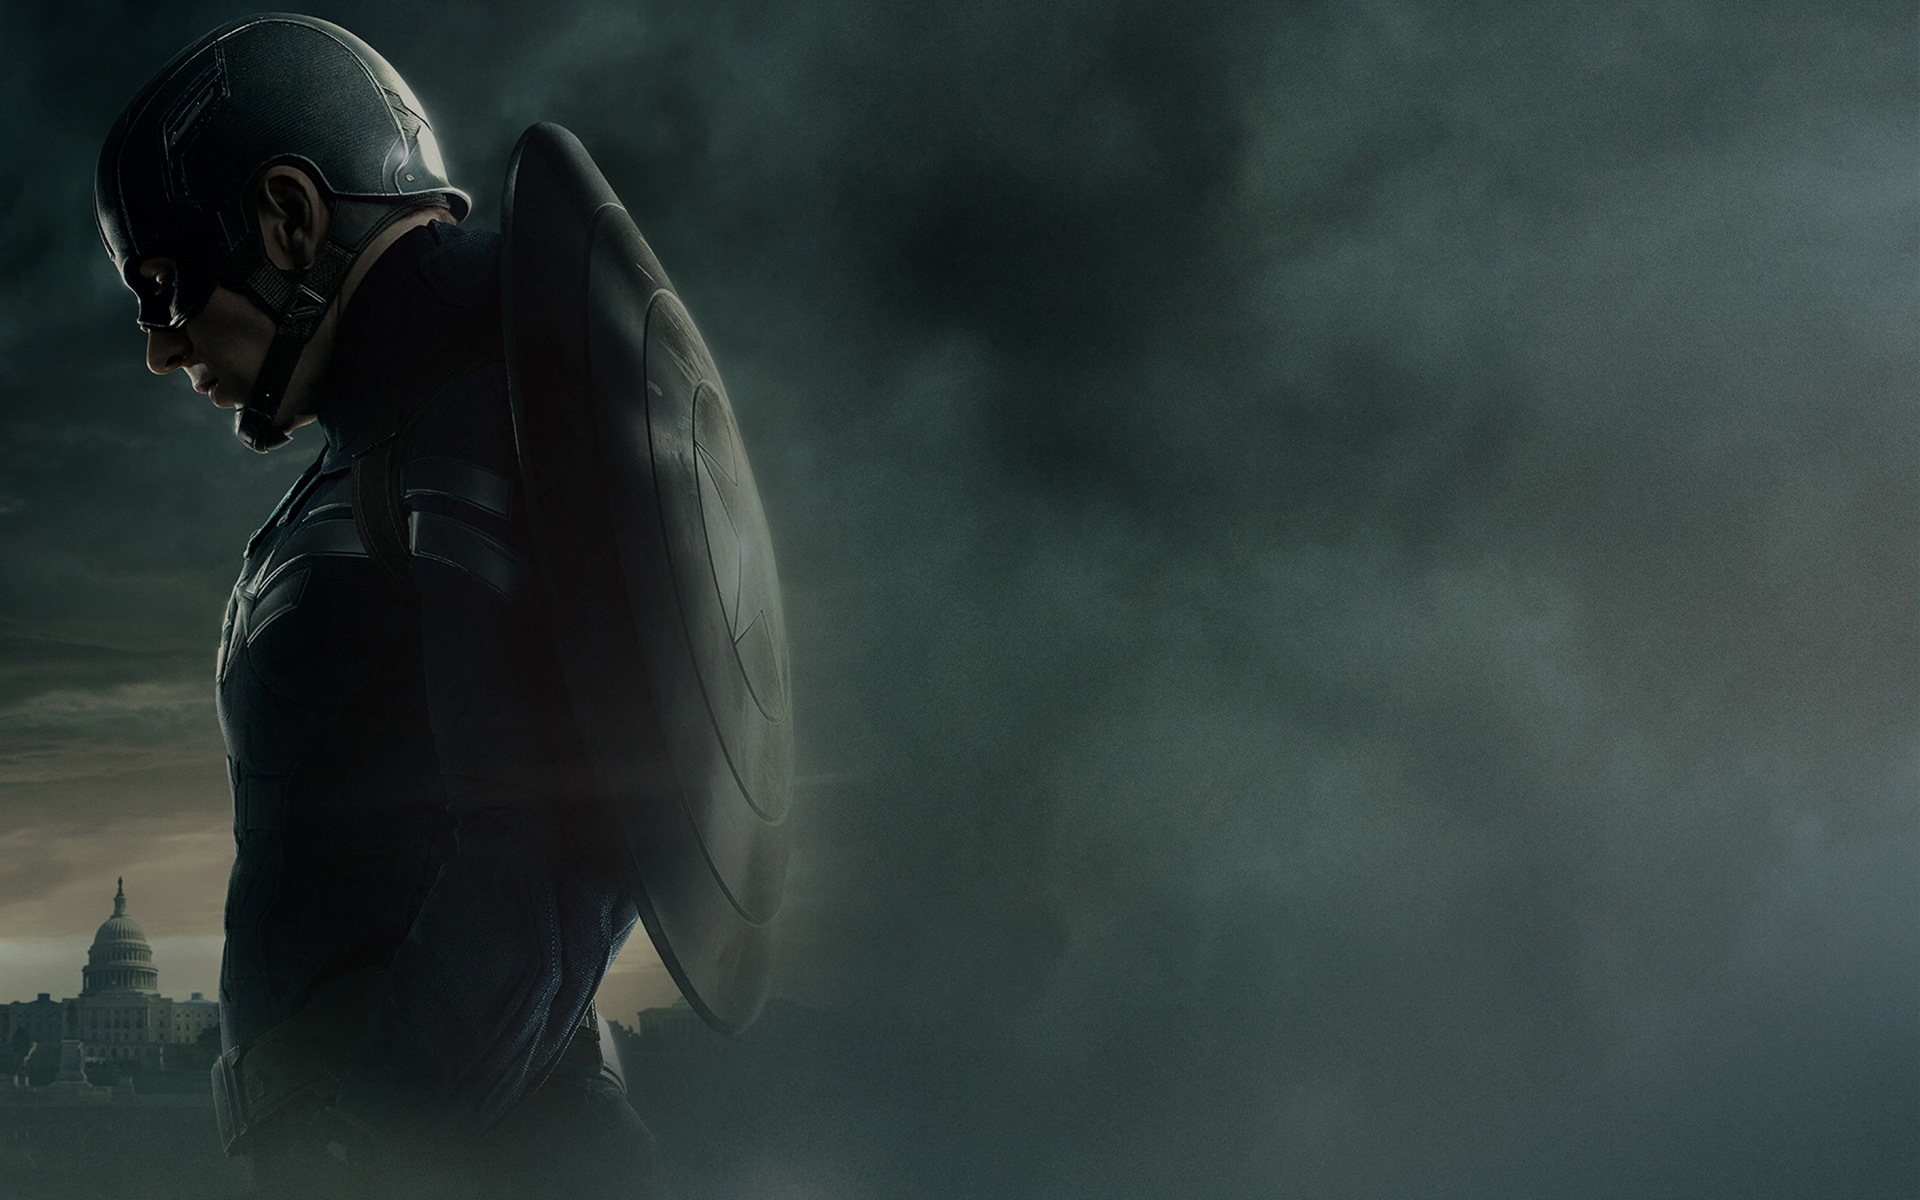 Captain America: The Winter Soldier HD wallpapers #3 - 1920x1200